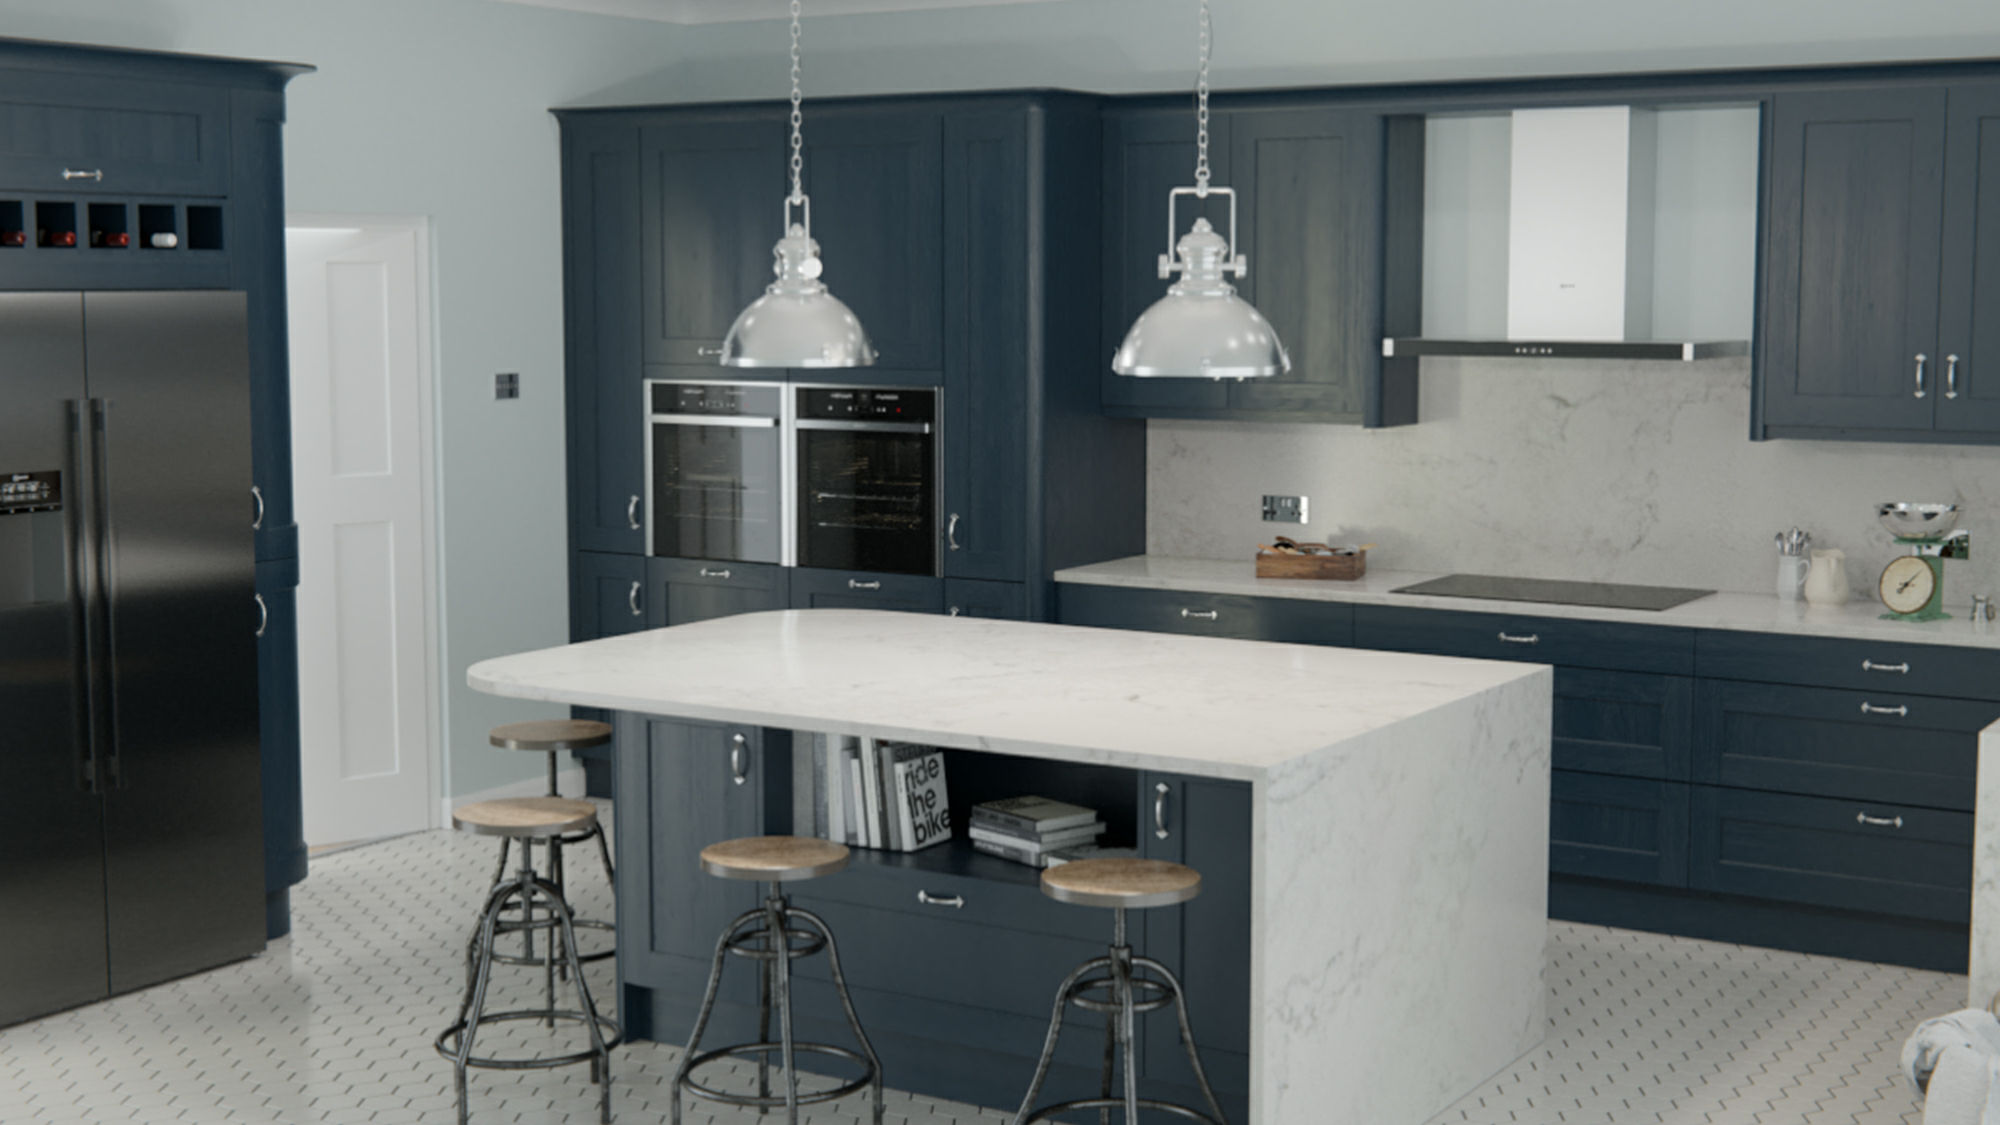 Wakefield Solid Wood Marine kitchens highlighting quality craftsmanship in a timeless marine hue